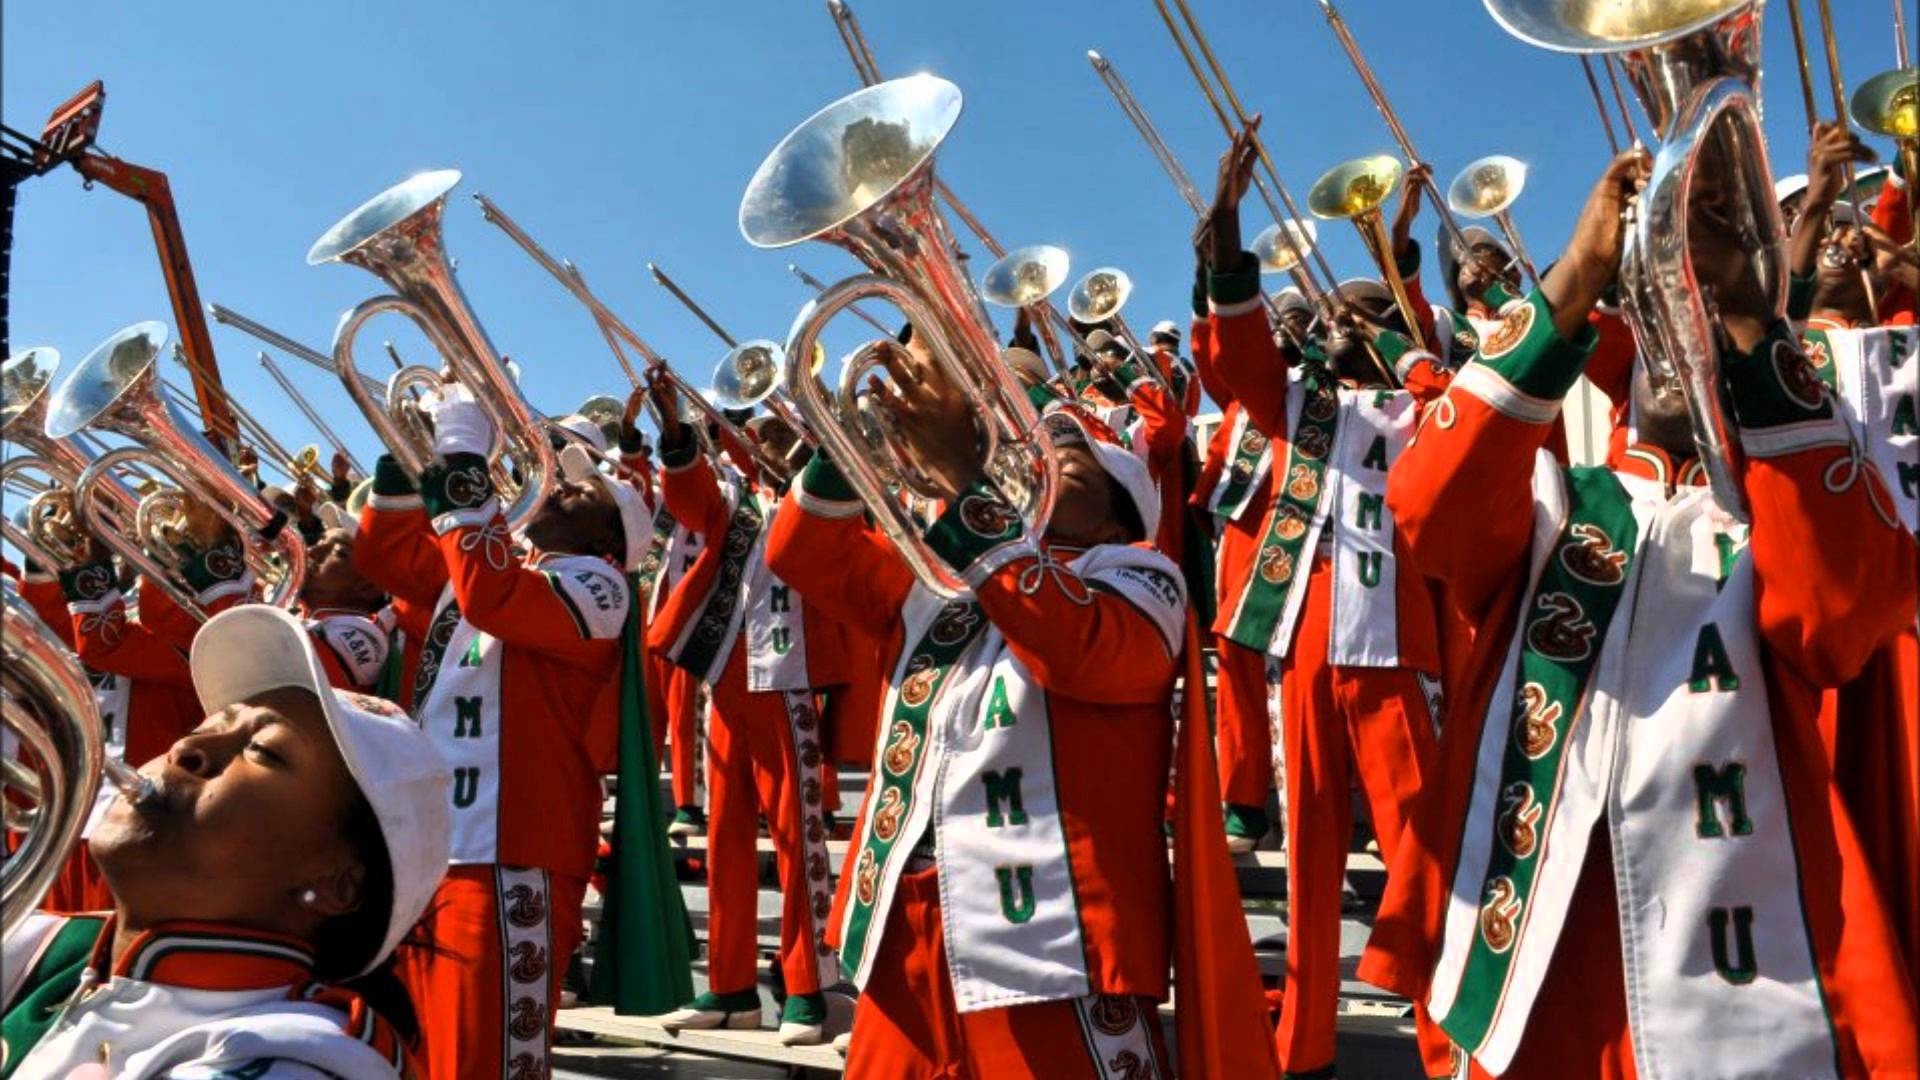 Marching Band: A group of musicians who play music as they march as part of a ceremony, FAMU. 1920x1080 Full HD Wallpaper.